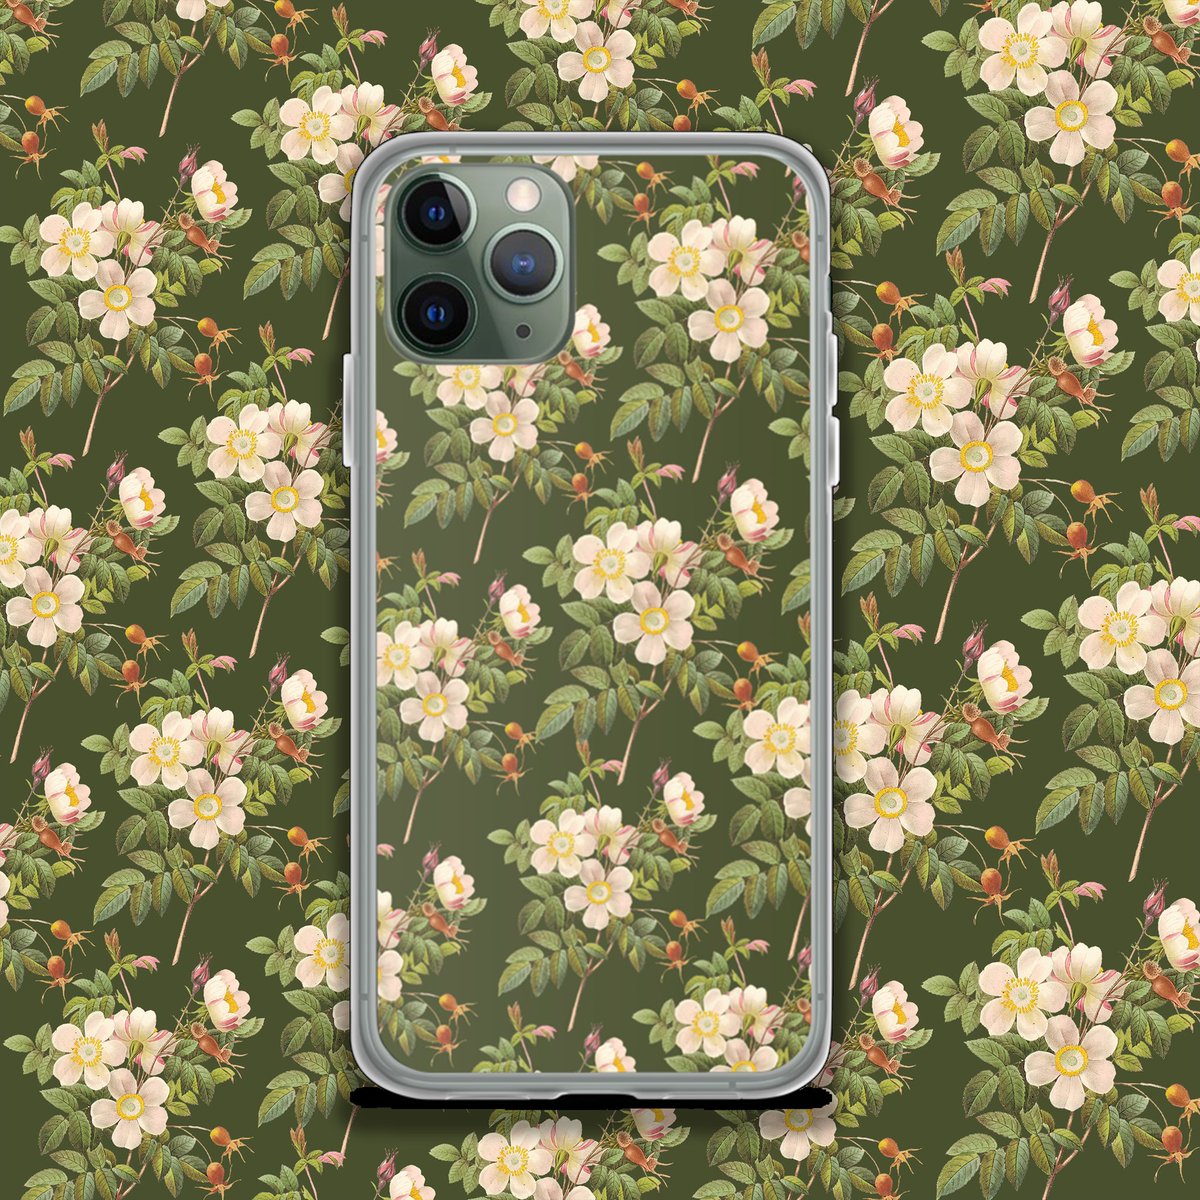 Spring is almost here! 💐explore the new collection of iPhone cases💐Link in Bio ✨ ⁣
.⁣
.⁣
.⁣
.⁣
.⁣
#casehp #phonecases #onlineshopping #iphone11 #accessories #flowers #cellphonecase #phonecovers #customcase #phoneaccessories #love #casemurah #phone #vintagestyle